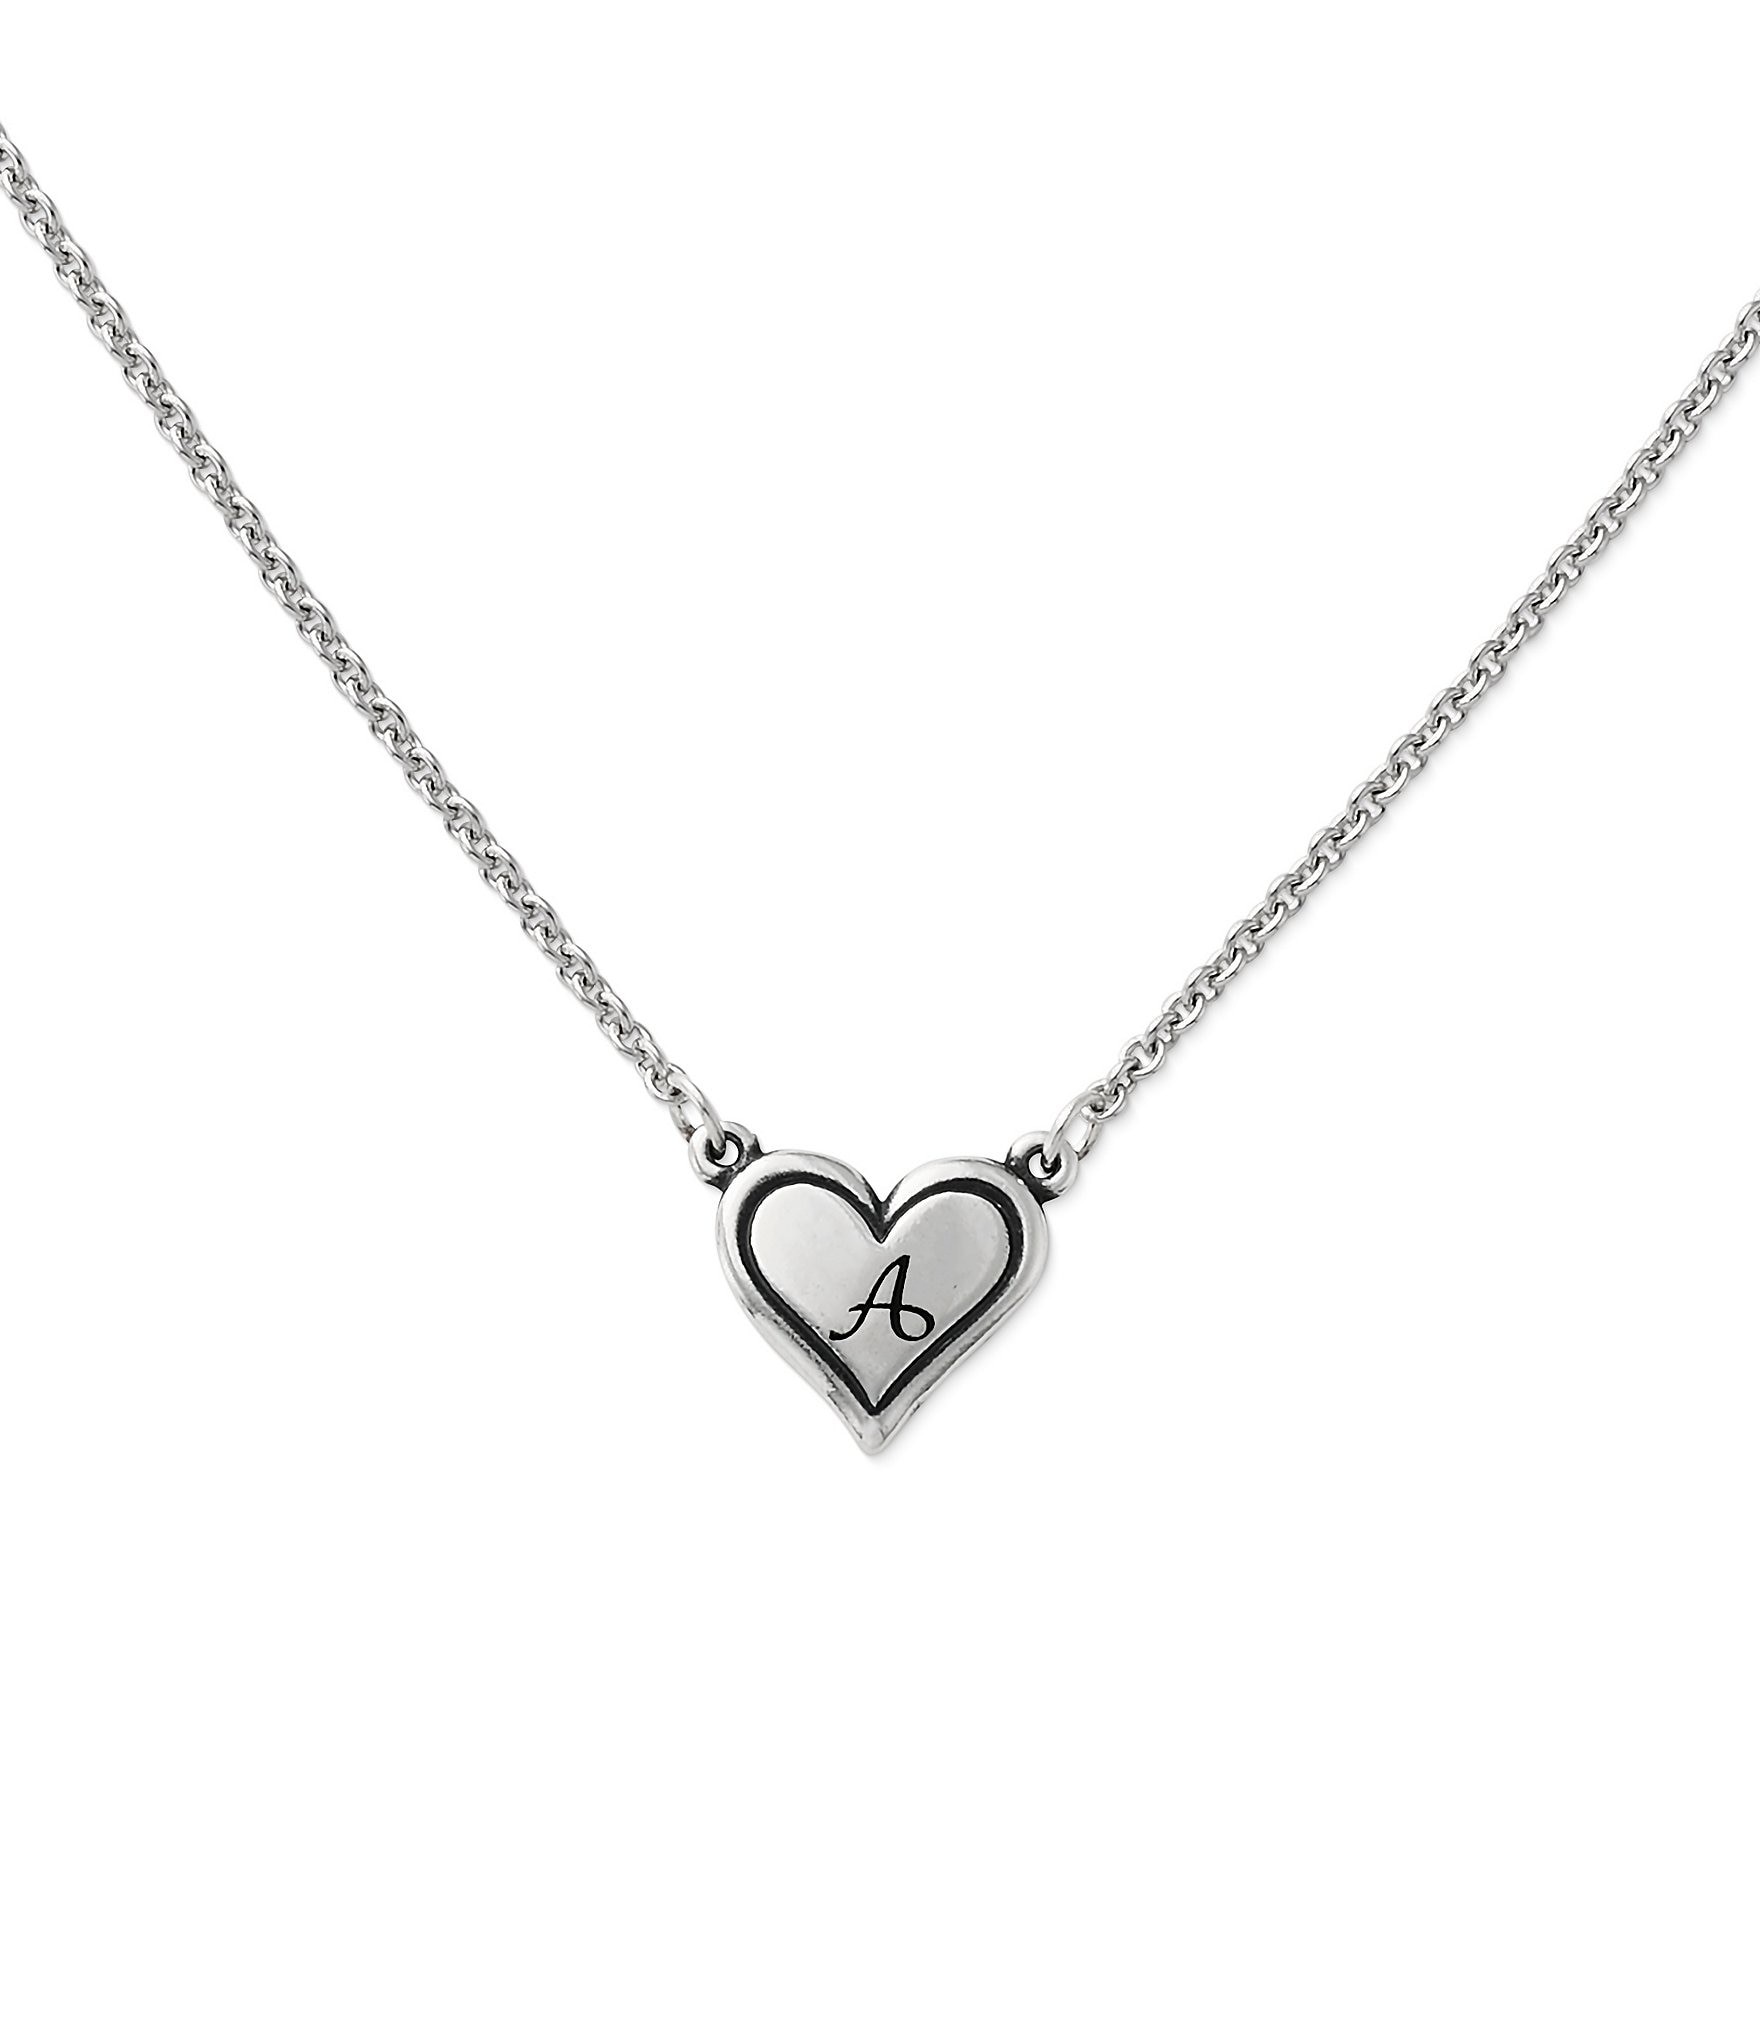 Small connected heart initial necklace – CYC Jewelry